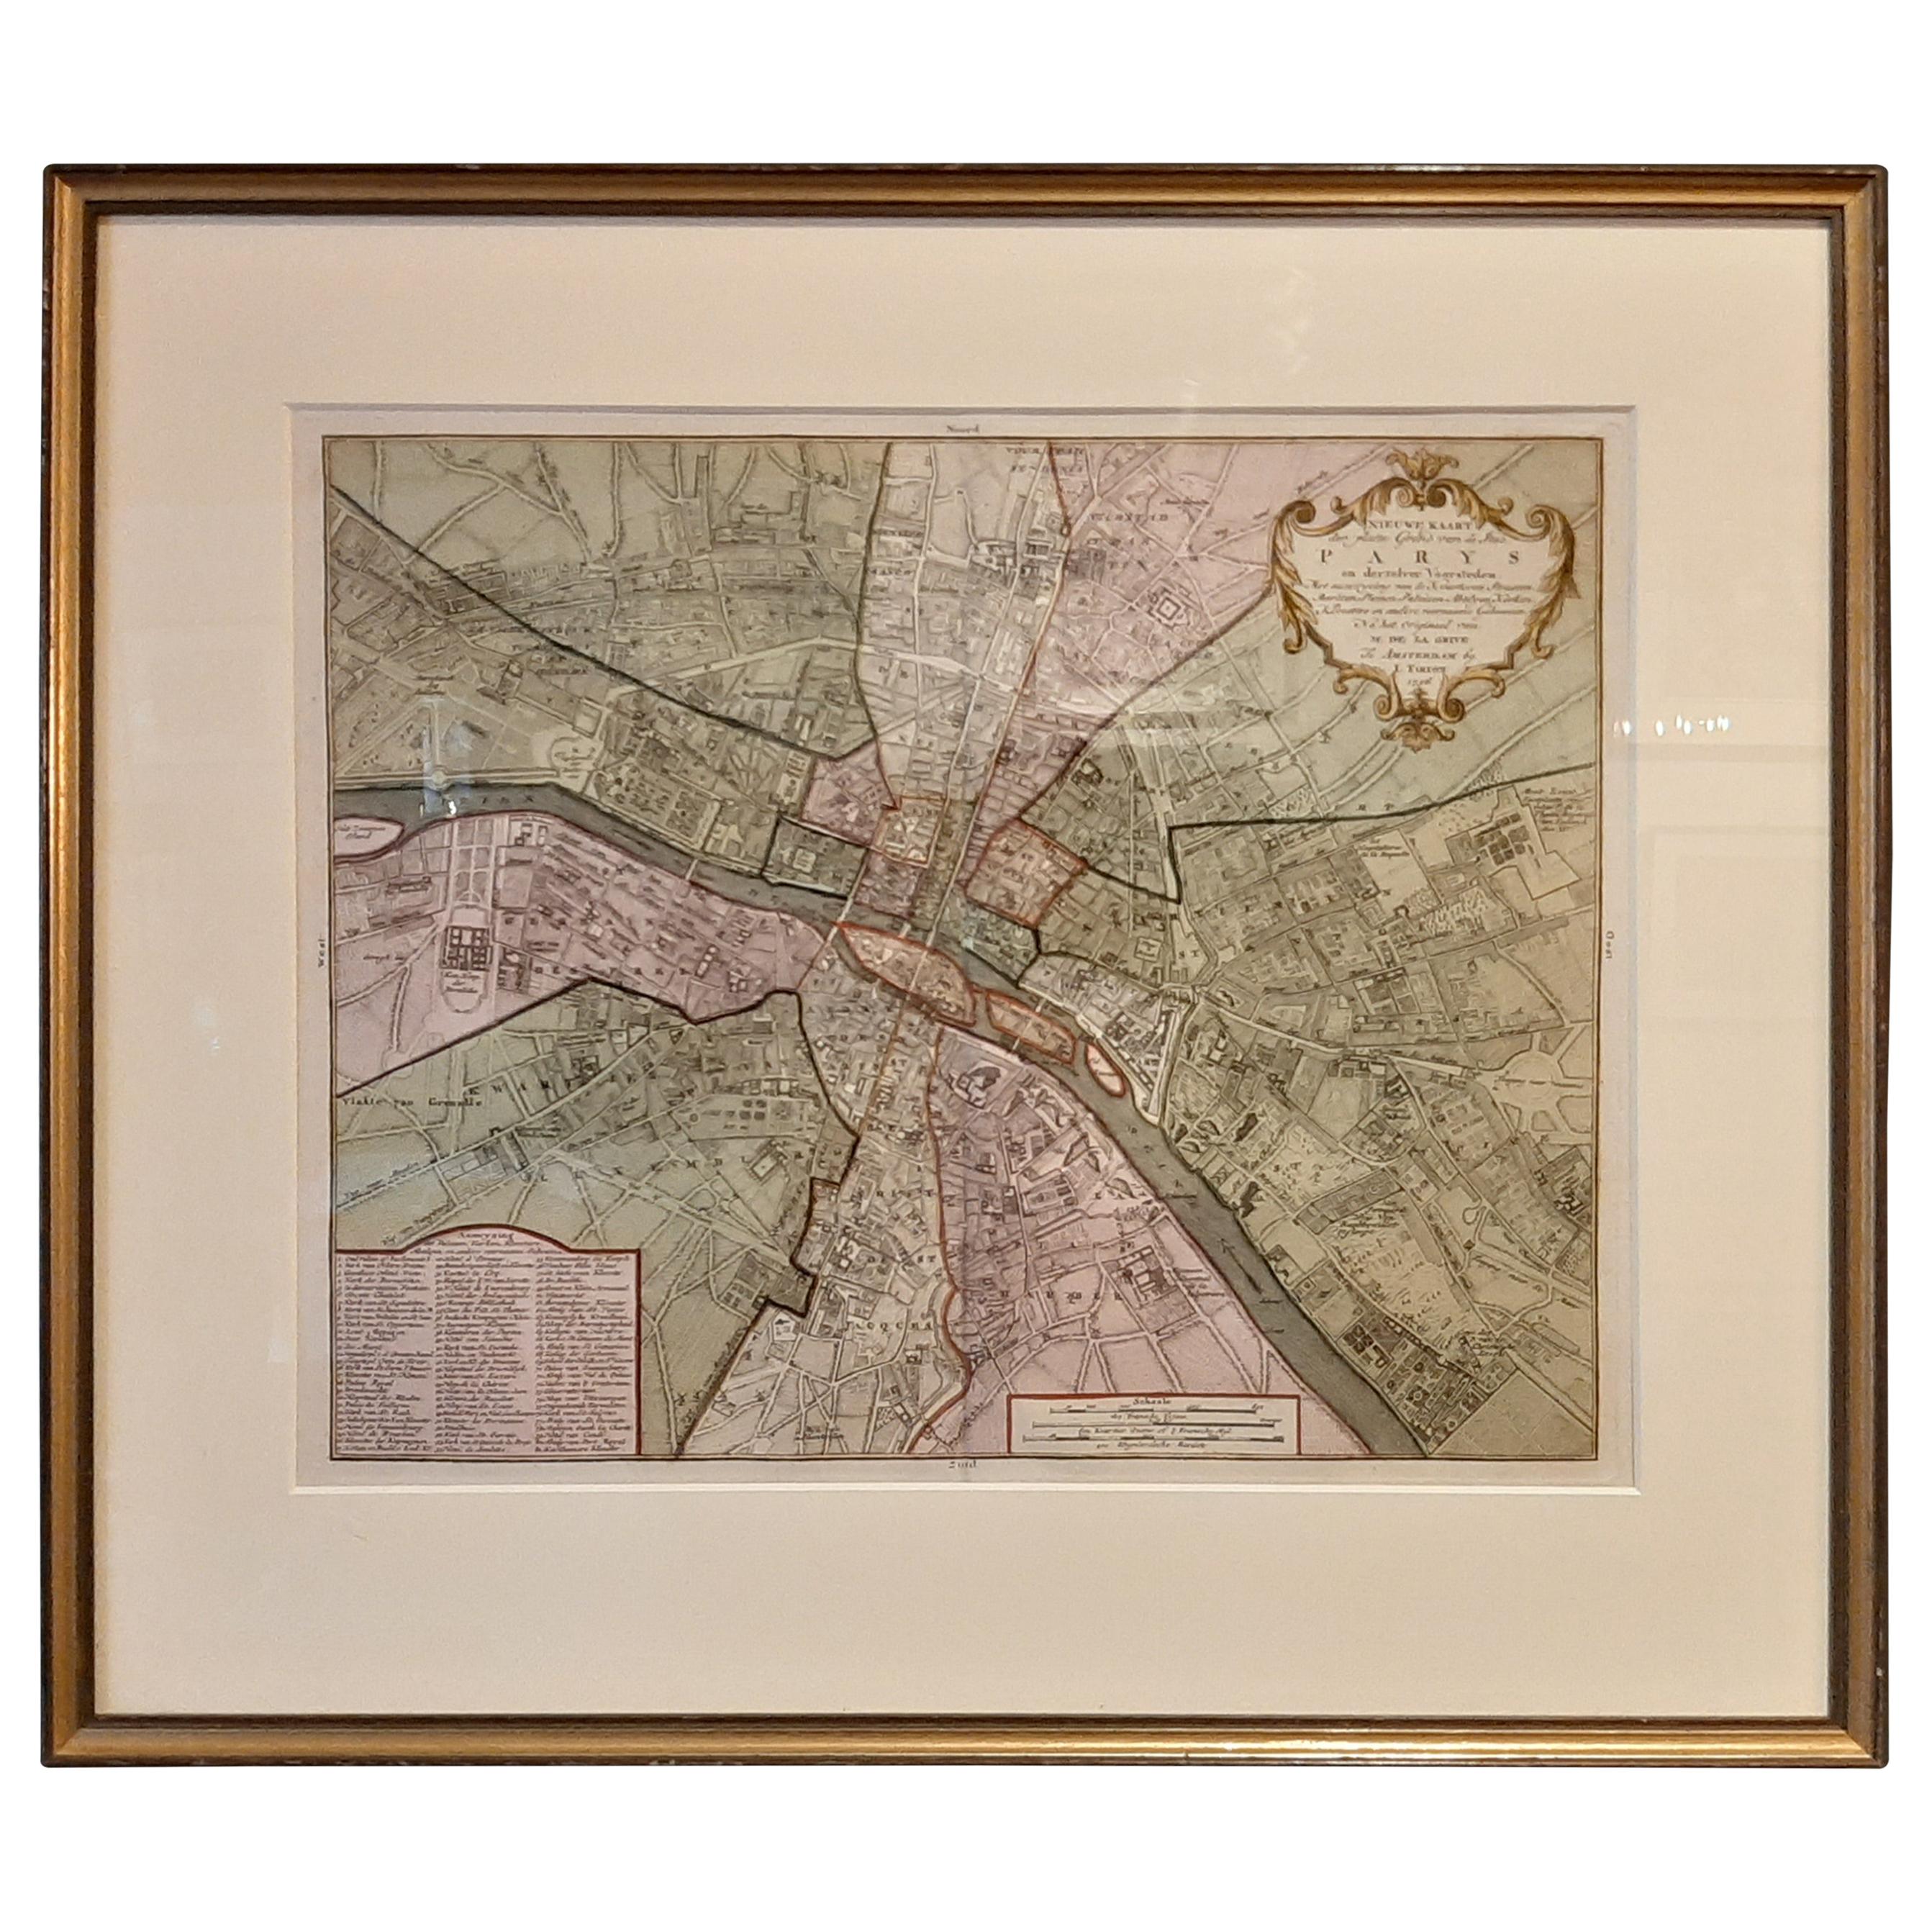 Antique Map of the City of Paris by Tirion '1763'